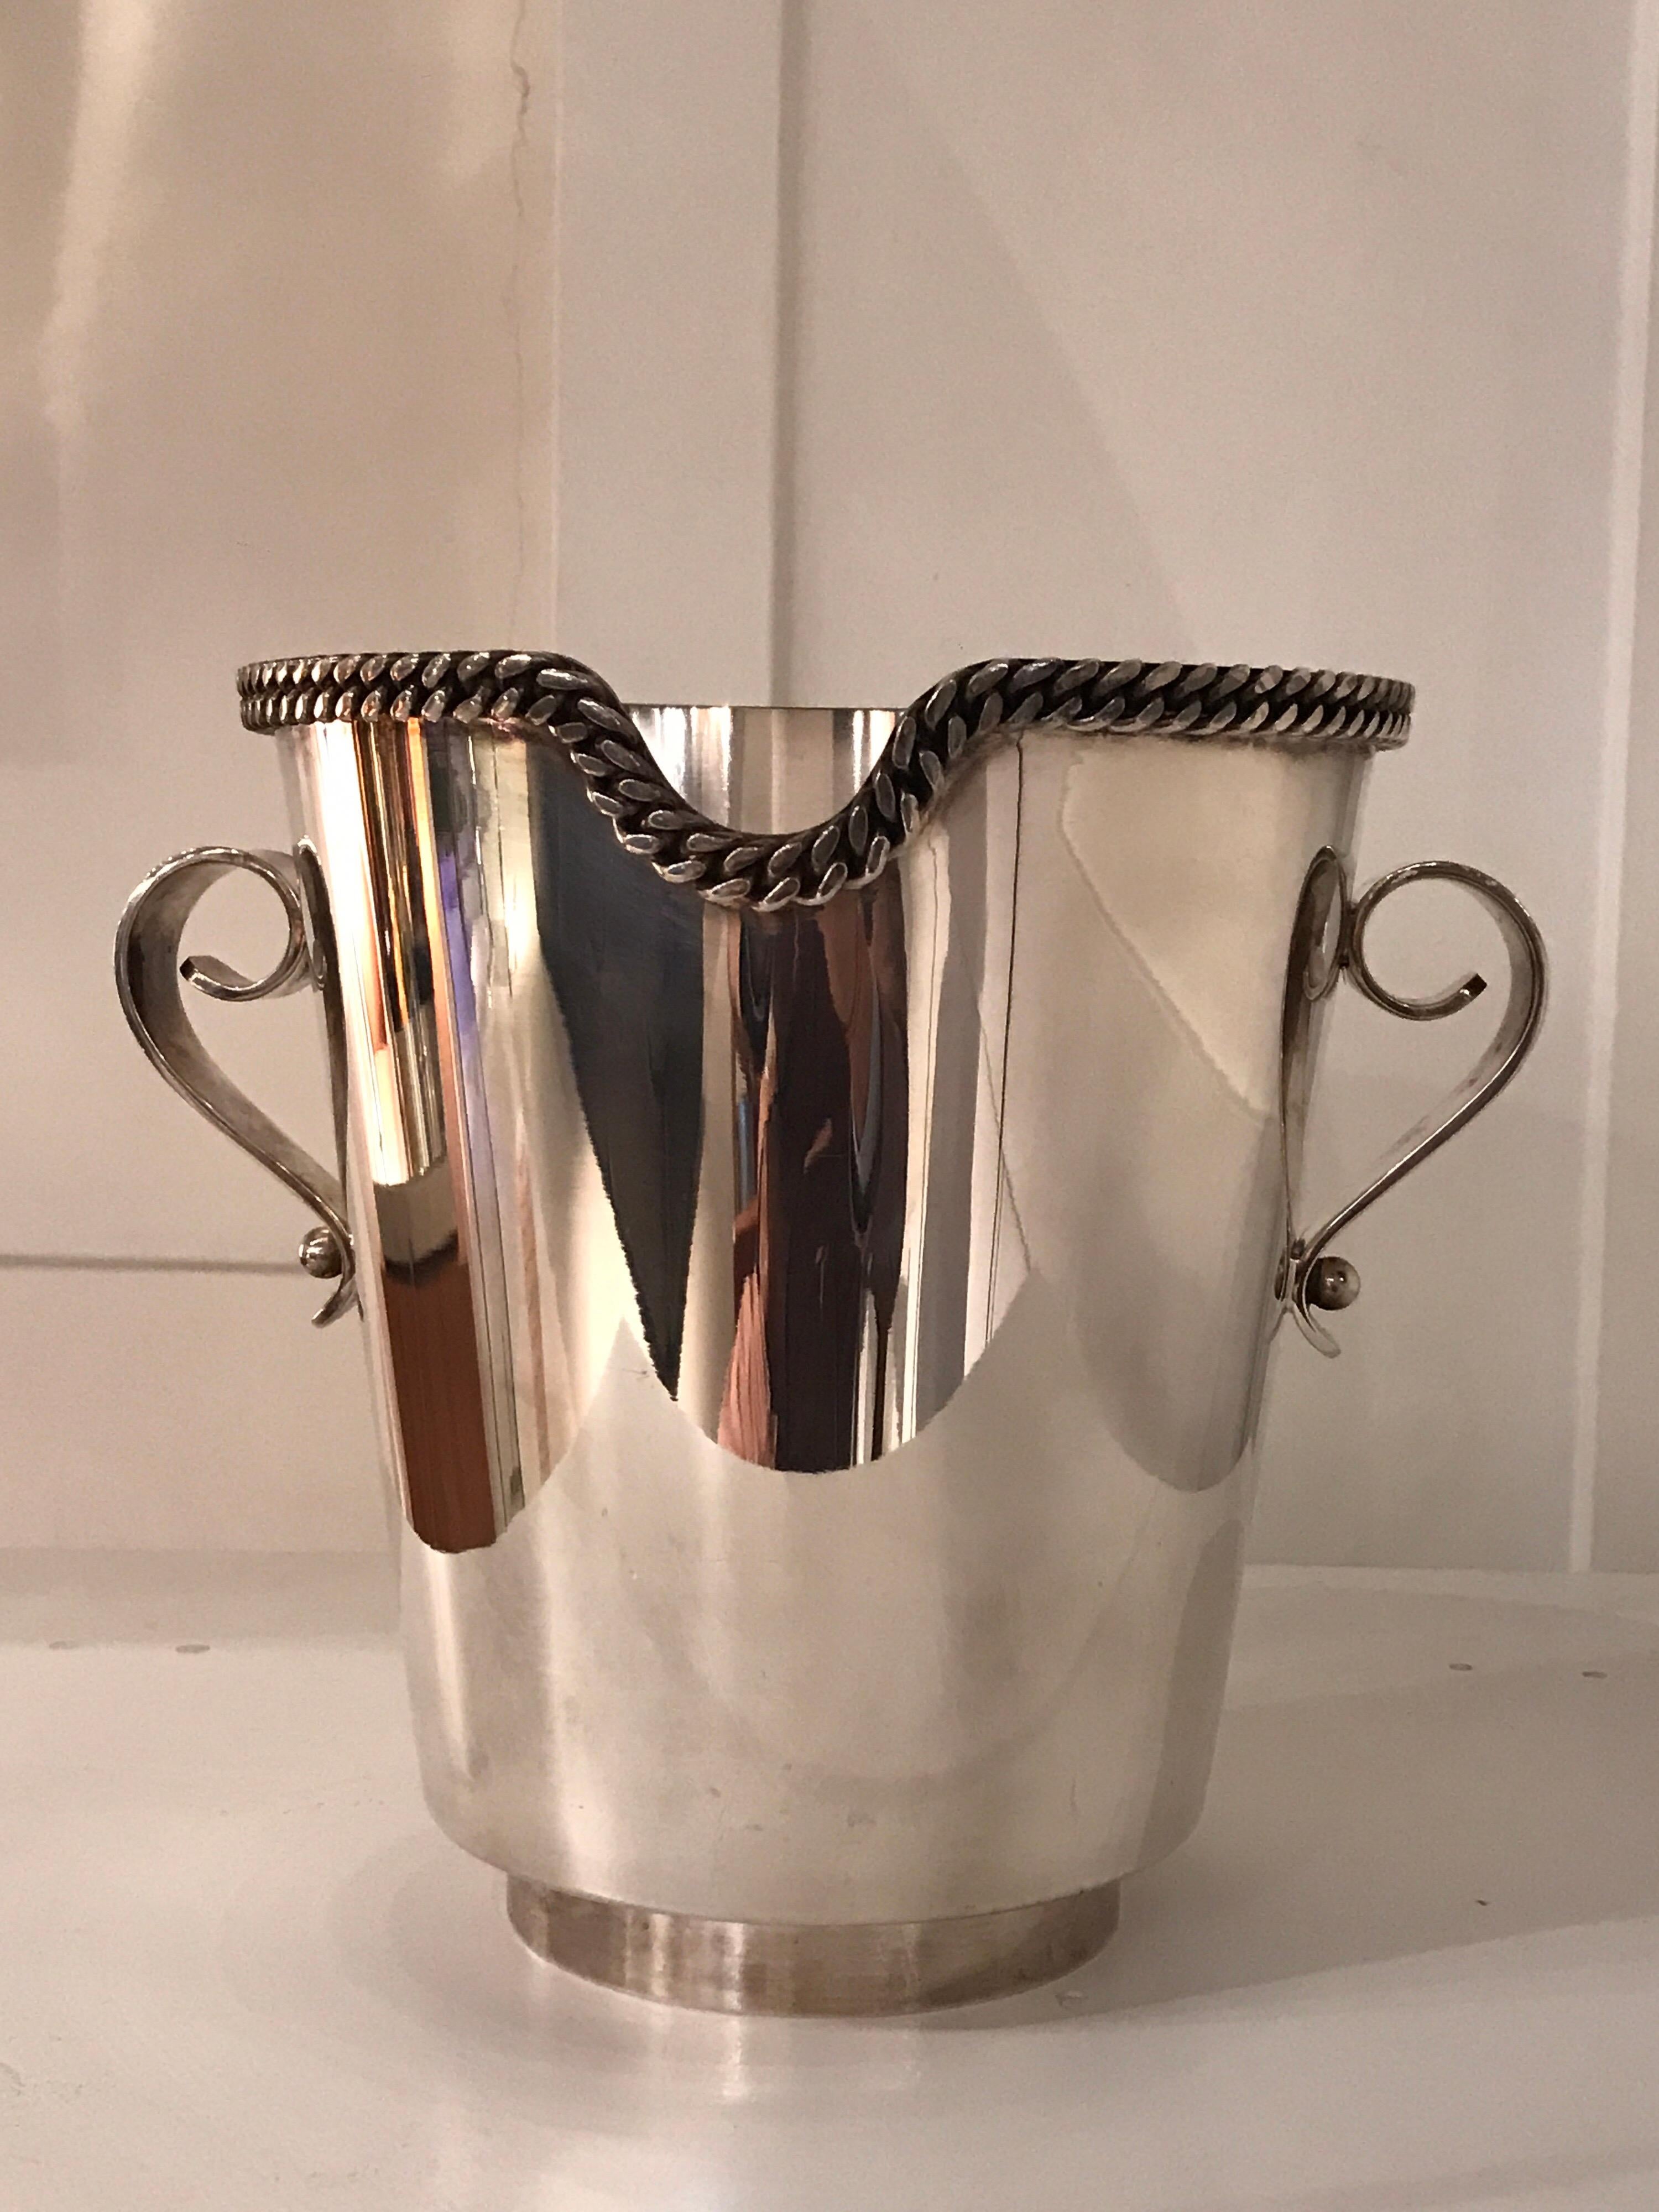 Jean Depres silver plated champagne bucket, circa 1960
Signed on the base and stamped.